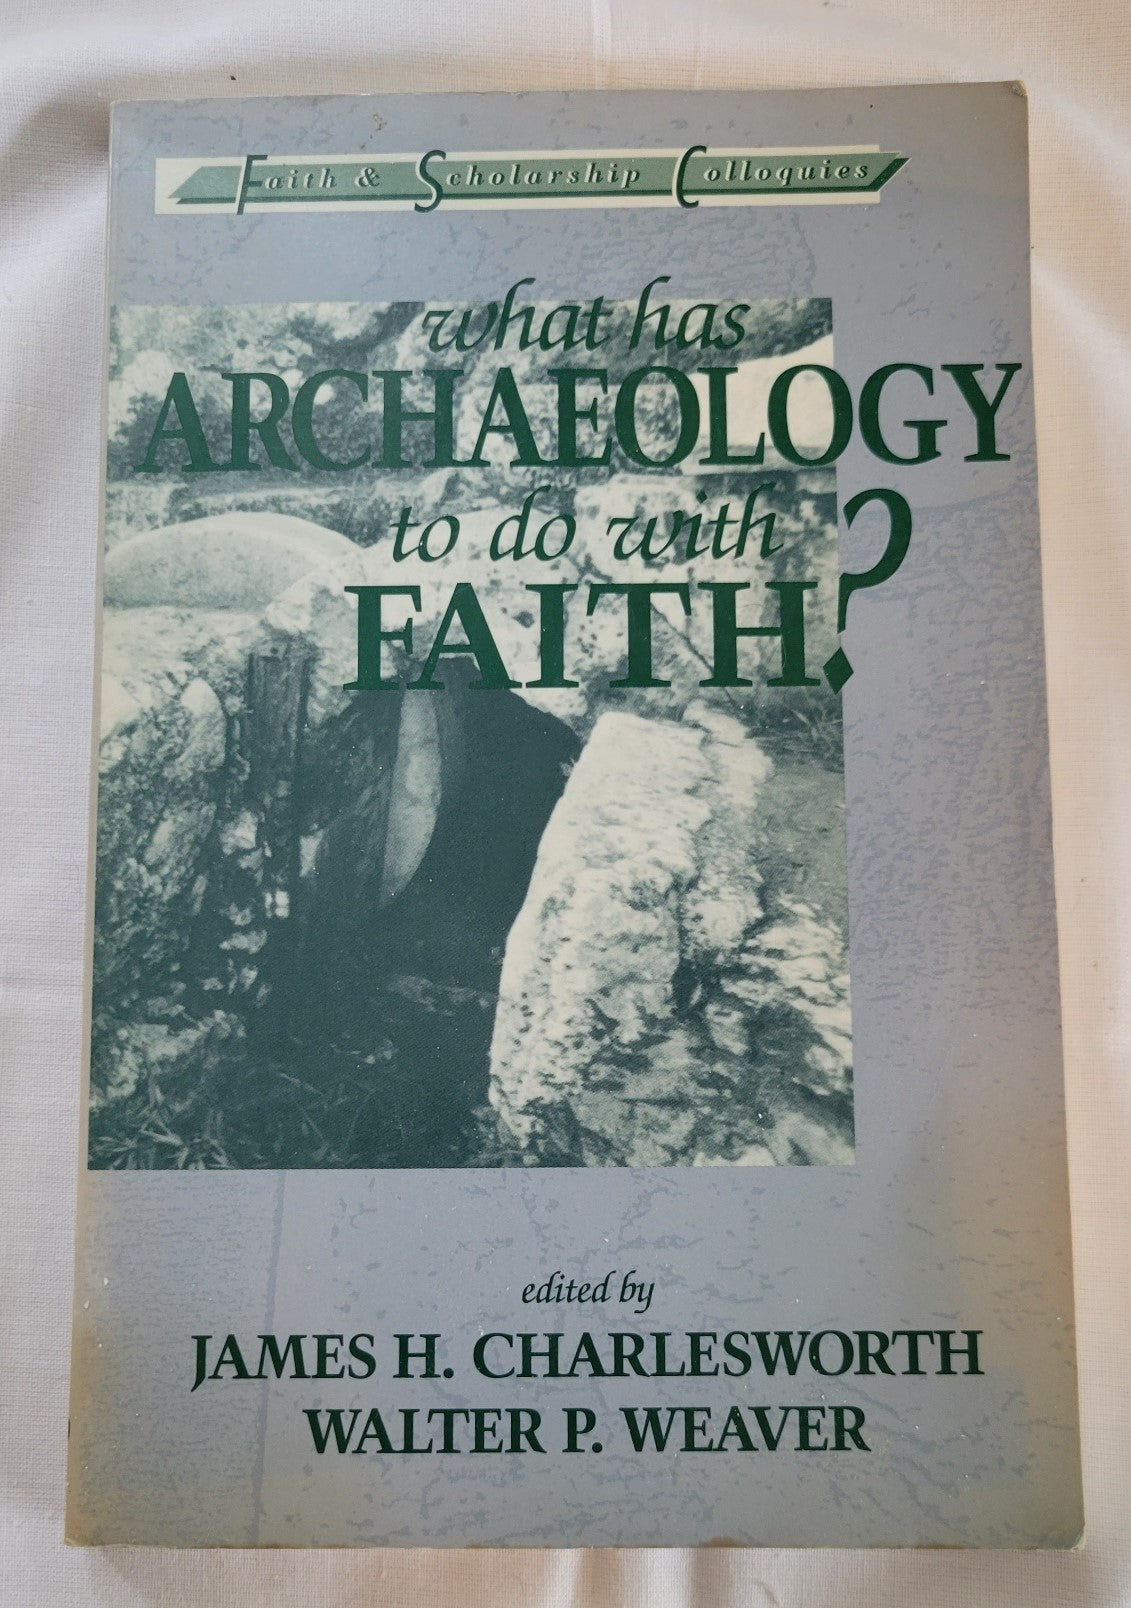 Used book for sale “What Has Archaeology to do with Faith?” edited by James H. Charlesworth and Walter P. Weaver. Front cover.